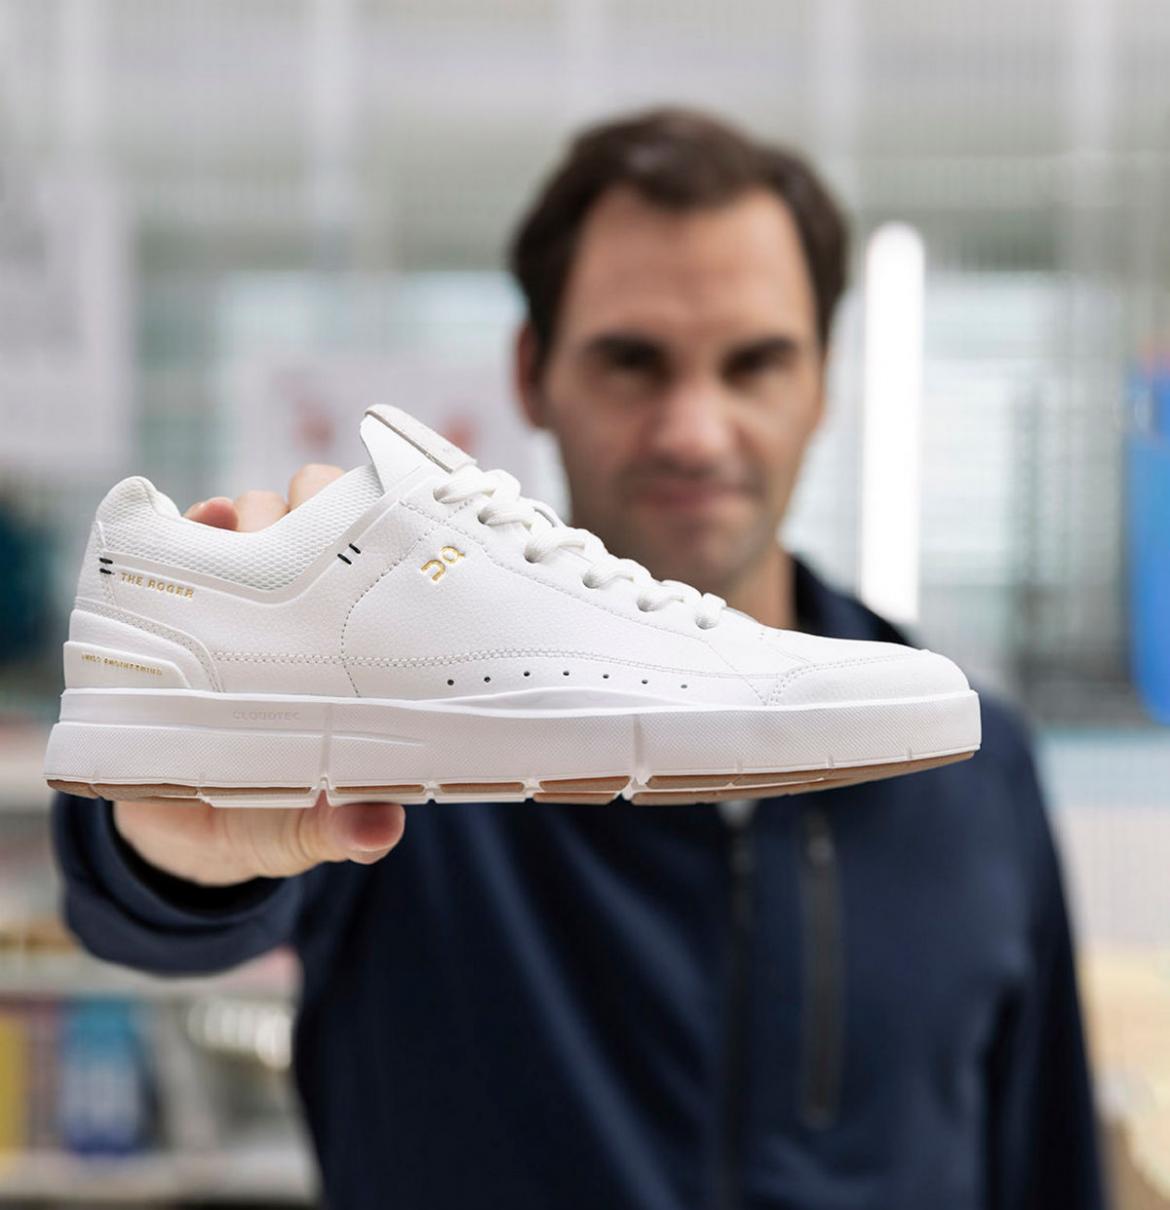 Roger Federer has launched an exclusive 